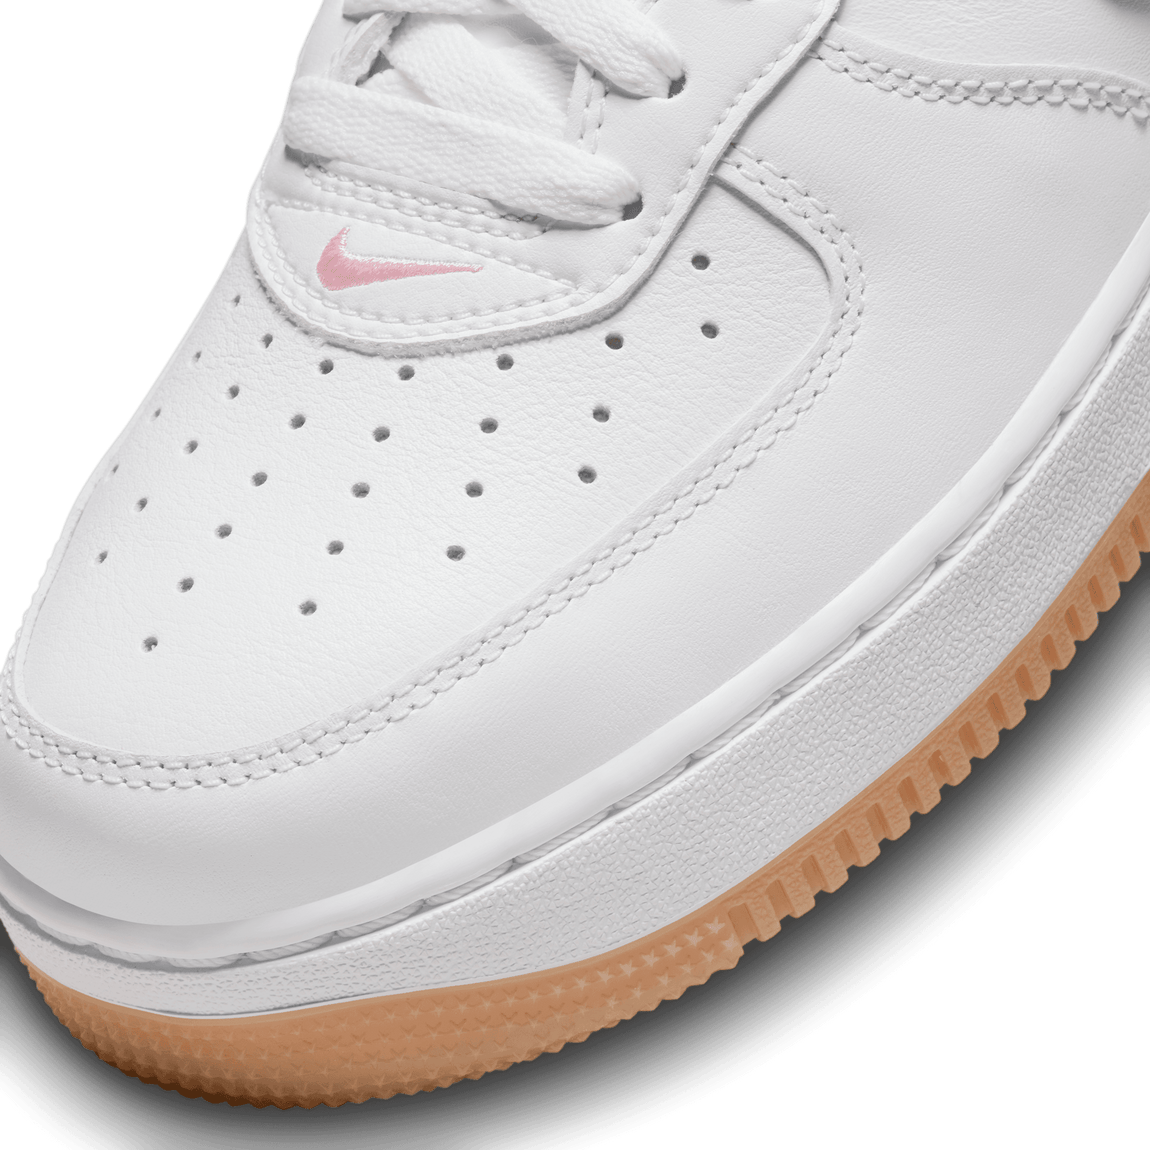 Nike Air Force 1 Low Retro (White/Pink/Gum Yellow-Metallic Gold) - Nike Air Force 1 Low Retro (White/Pink/Gum Yellow-Metallic Gold) - 